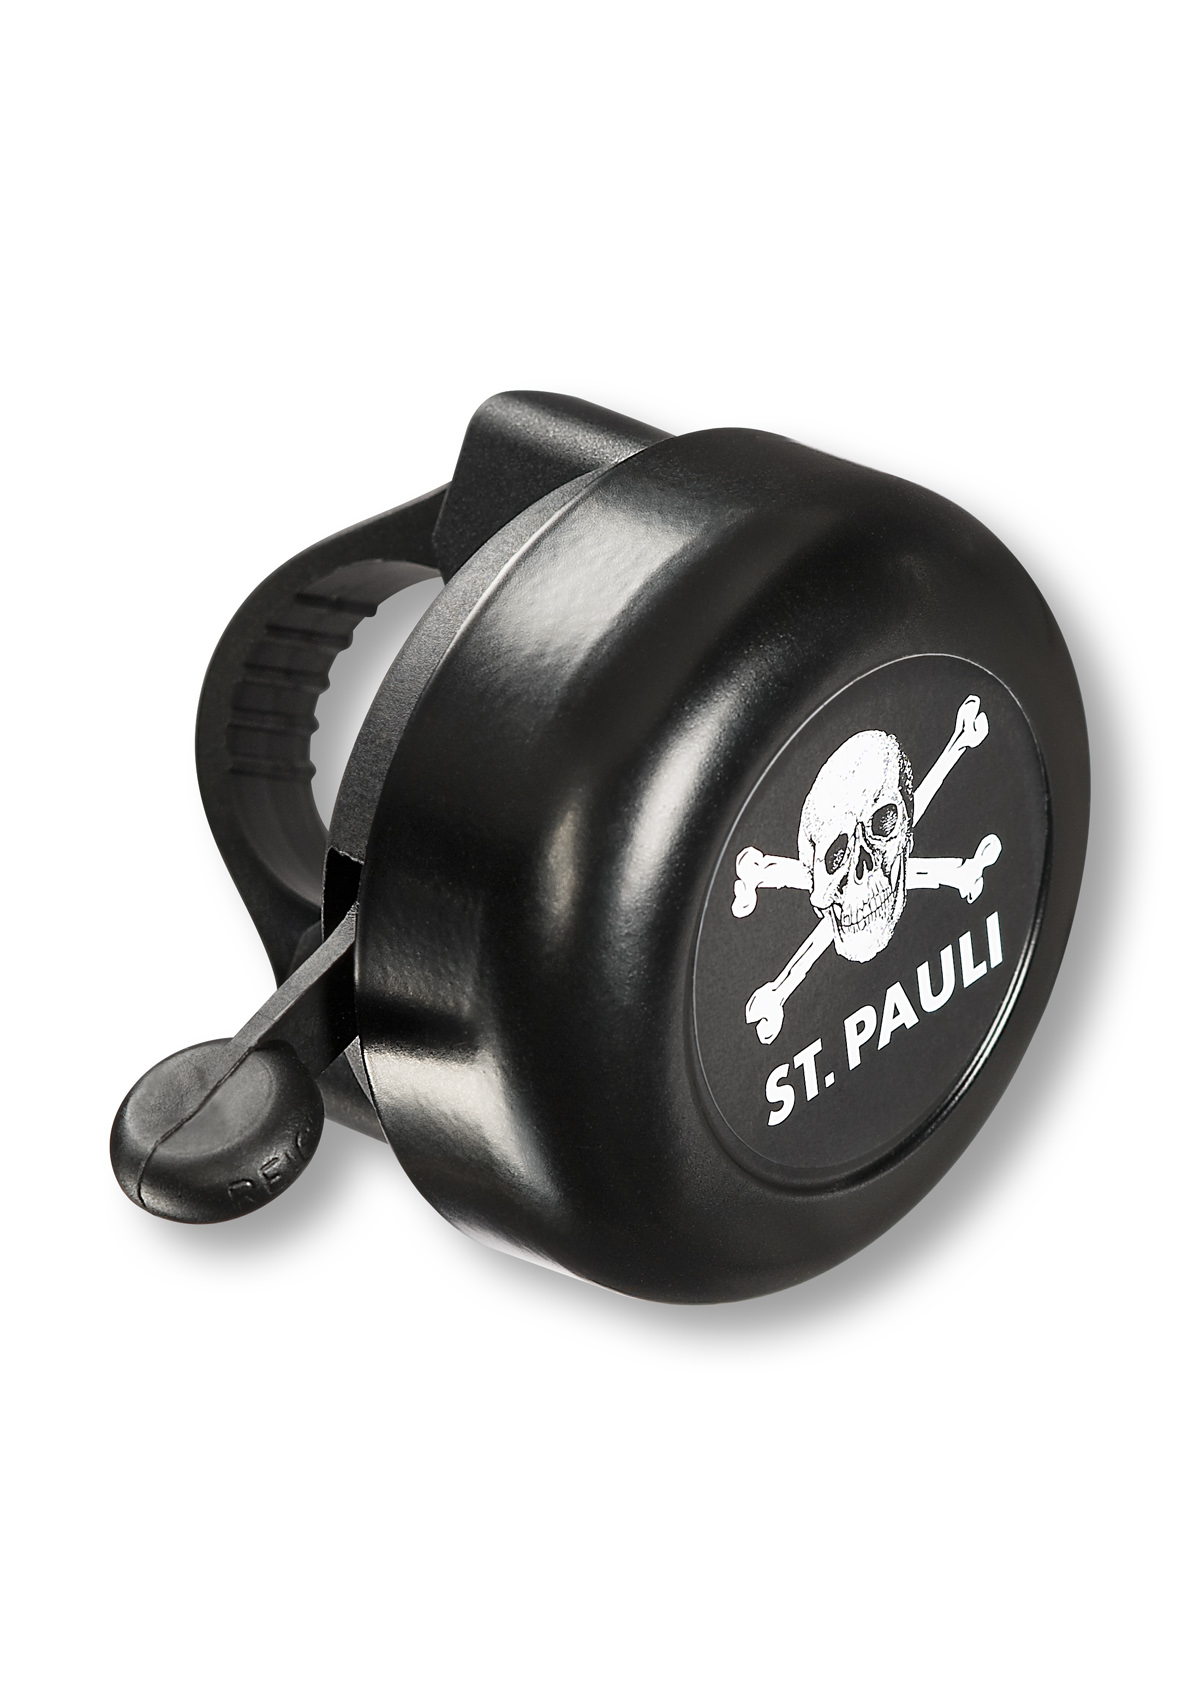 Skull and crossbones bicycle bell